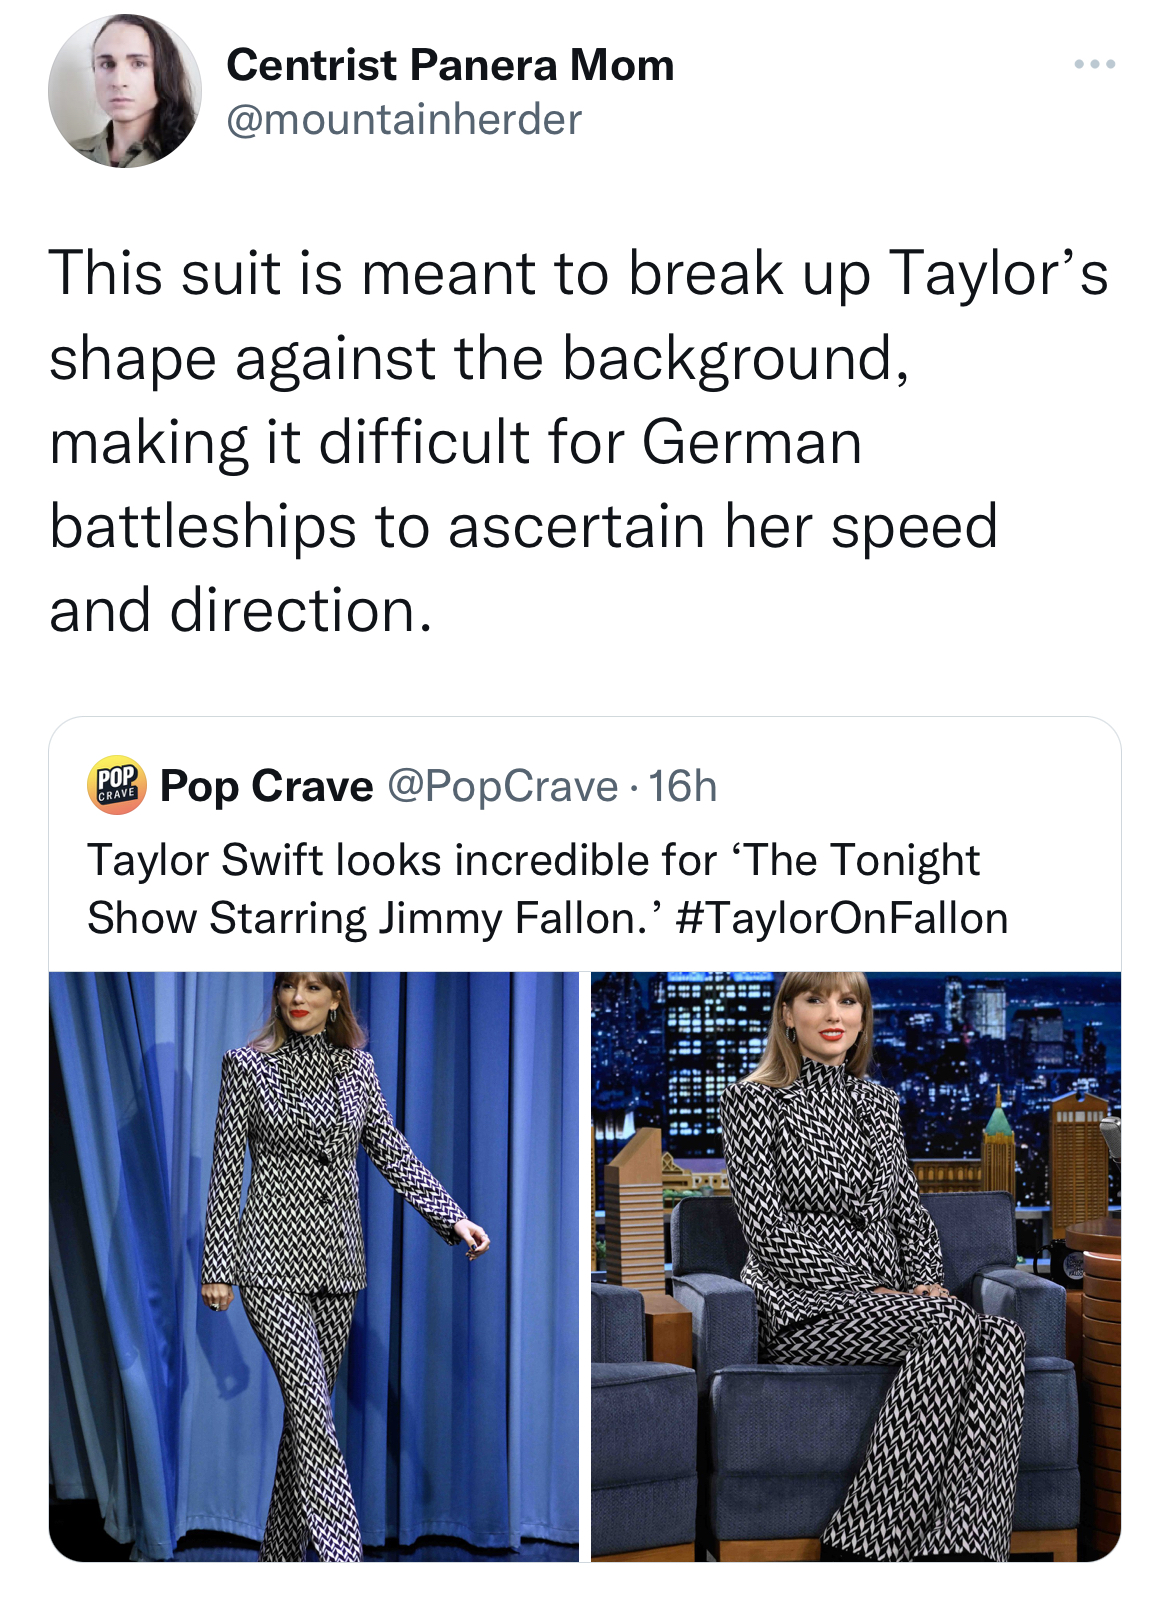 Tweets dunking on celebs - sleeve - Centrist Panera Mom This suit is meant to break up Taylor's shape against the background, making it difficult for German battleships to ascertain her speed and direction. Pop Crave 16h Taylor Swift looks incredible for 